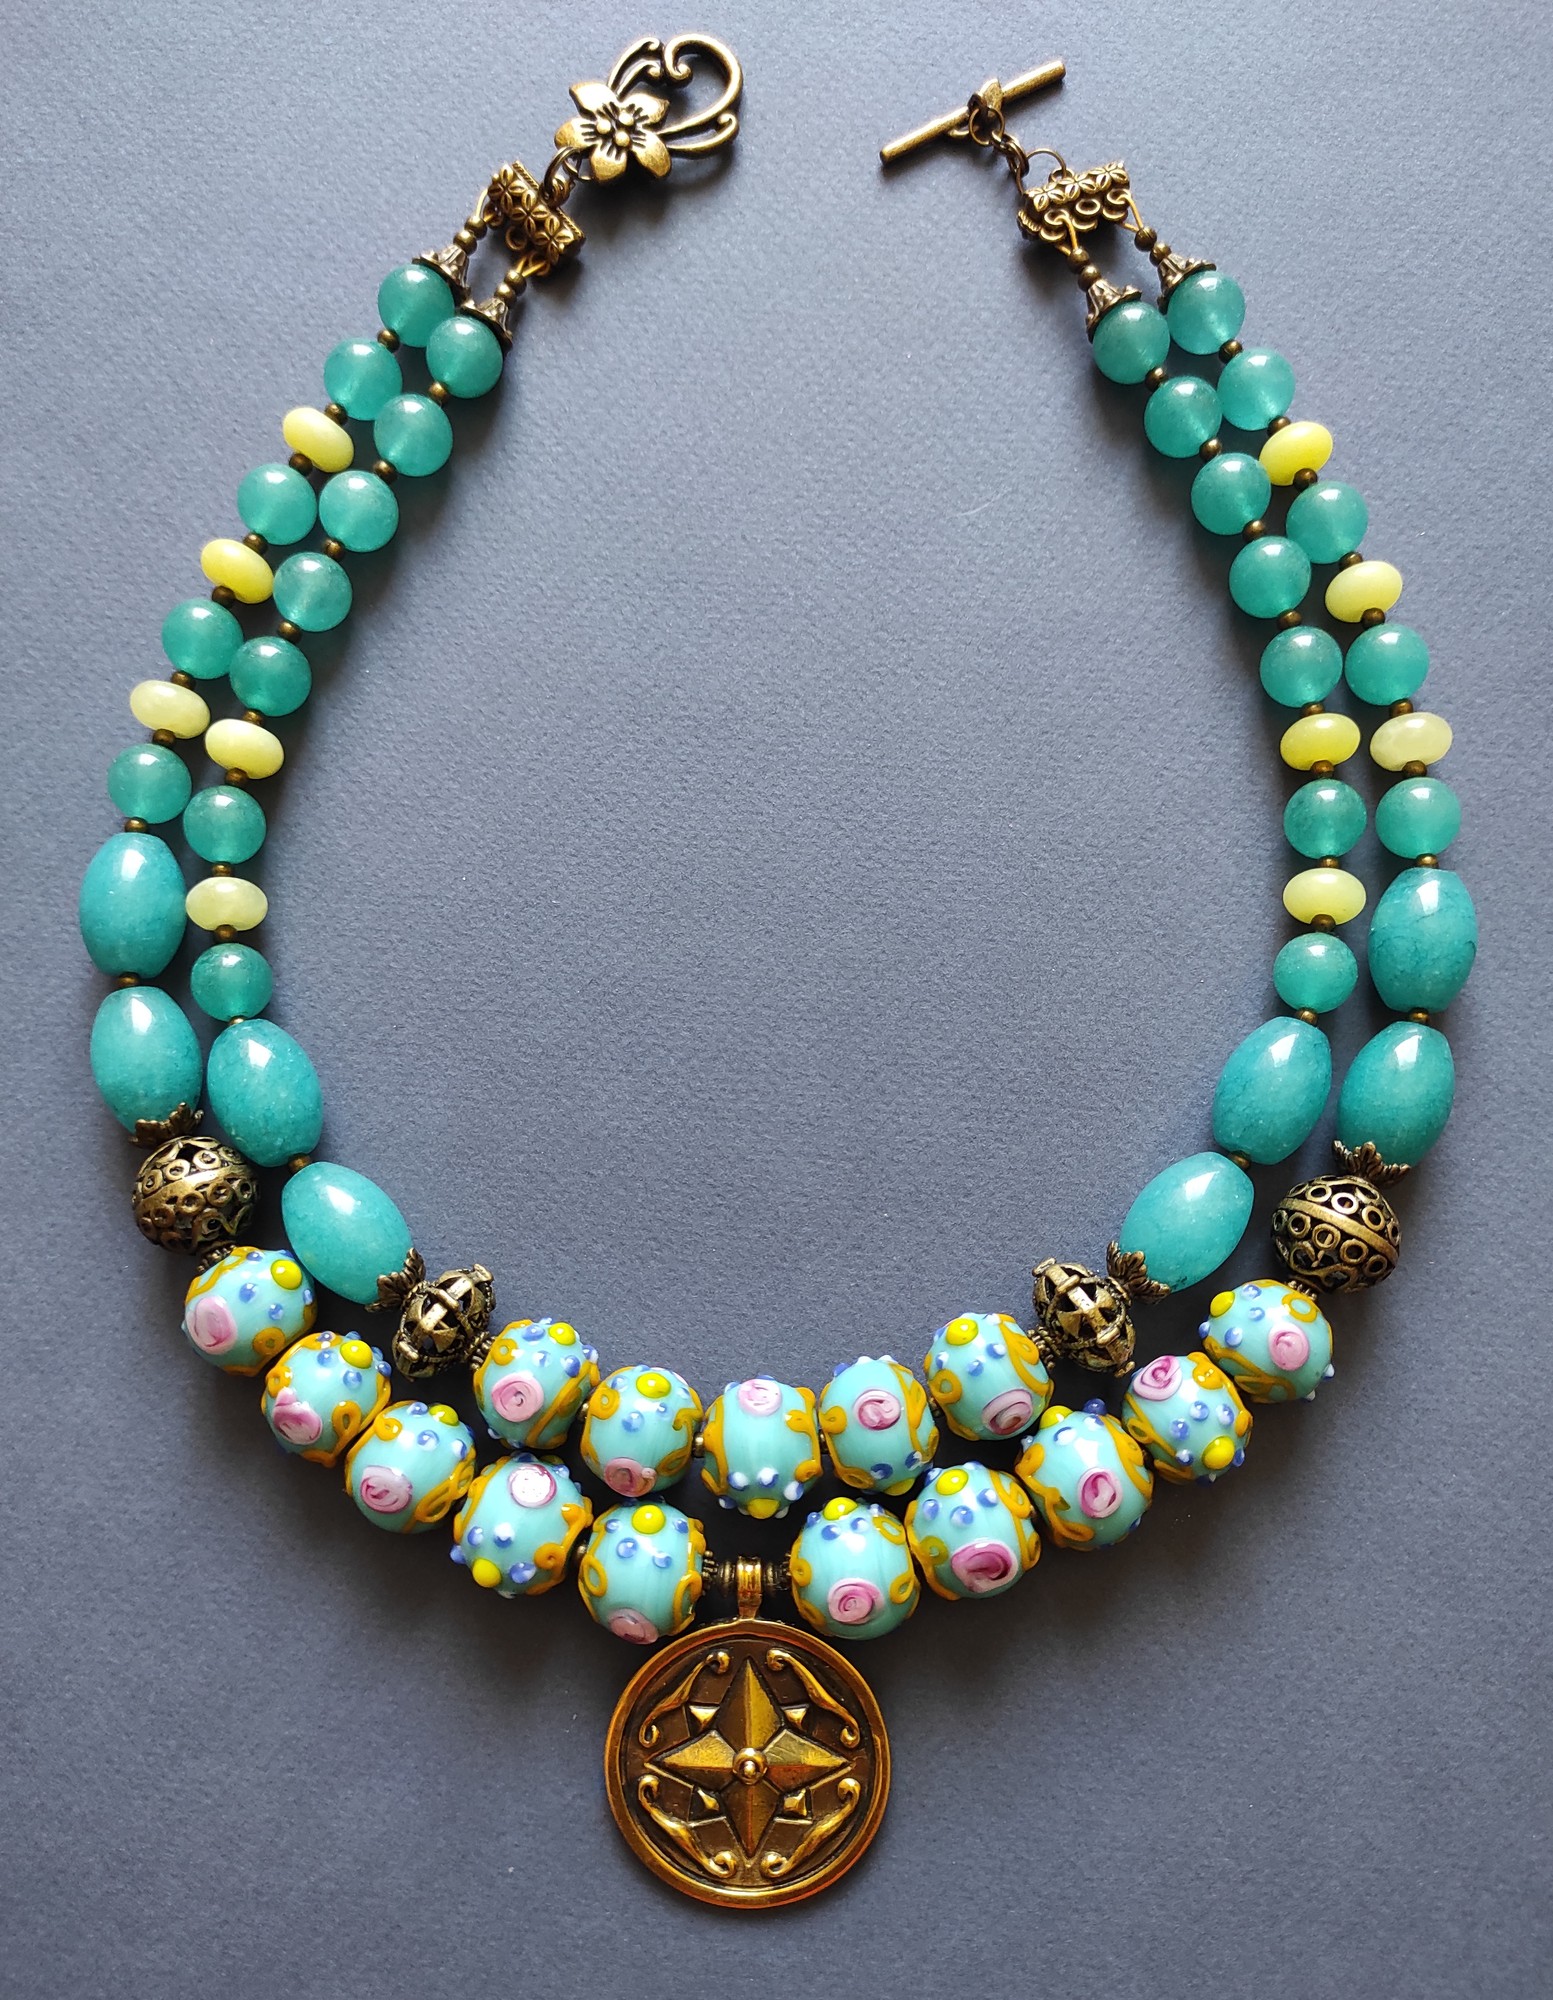 Necklace "Nymphaea" from chalcedony, jadeite and glass beads